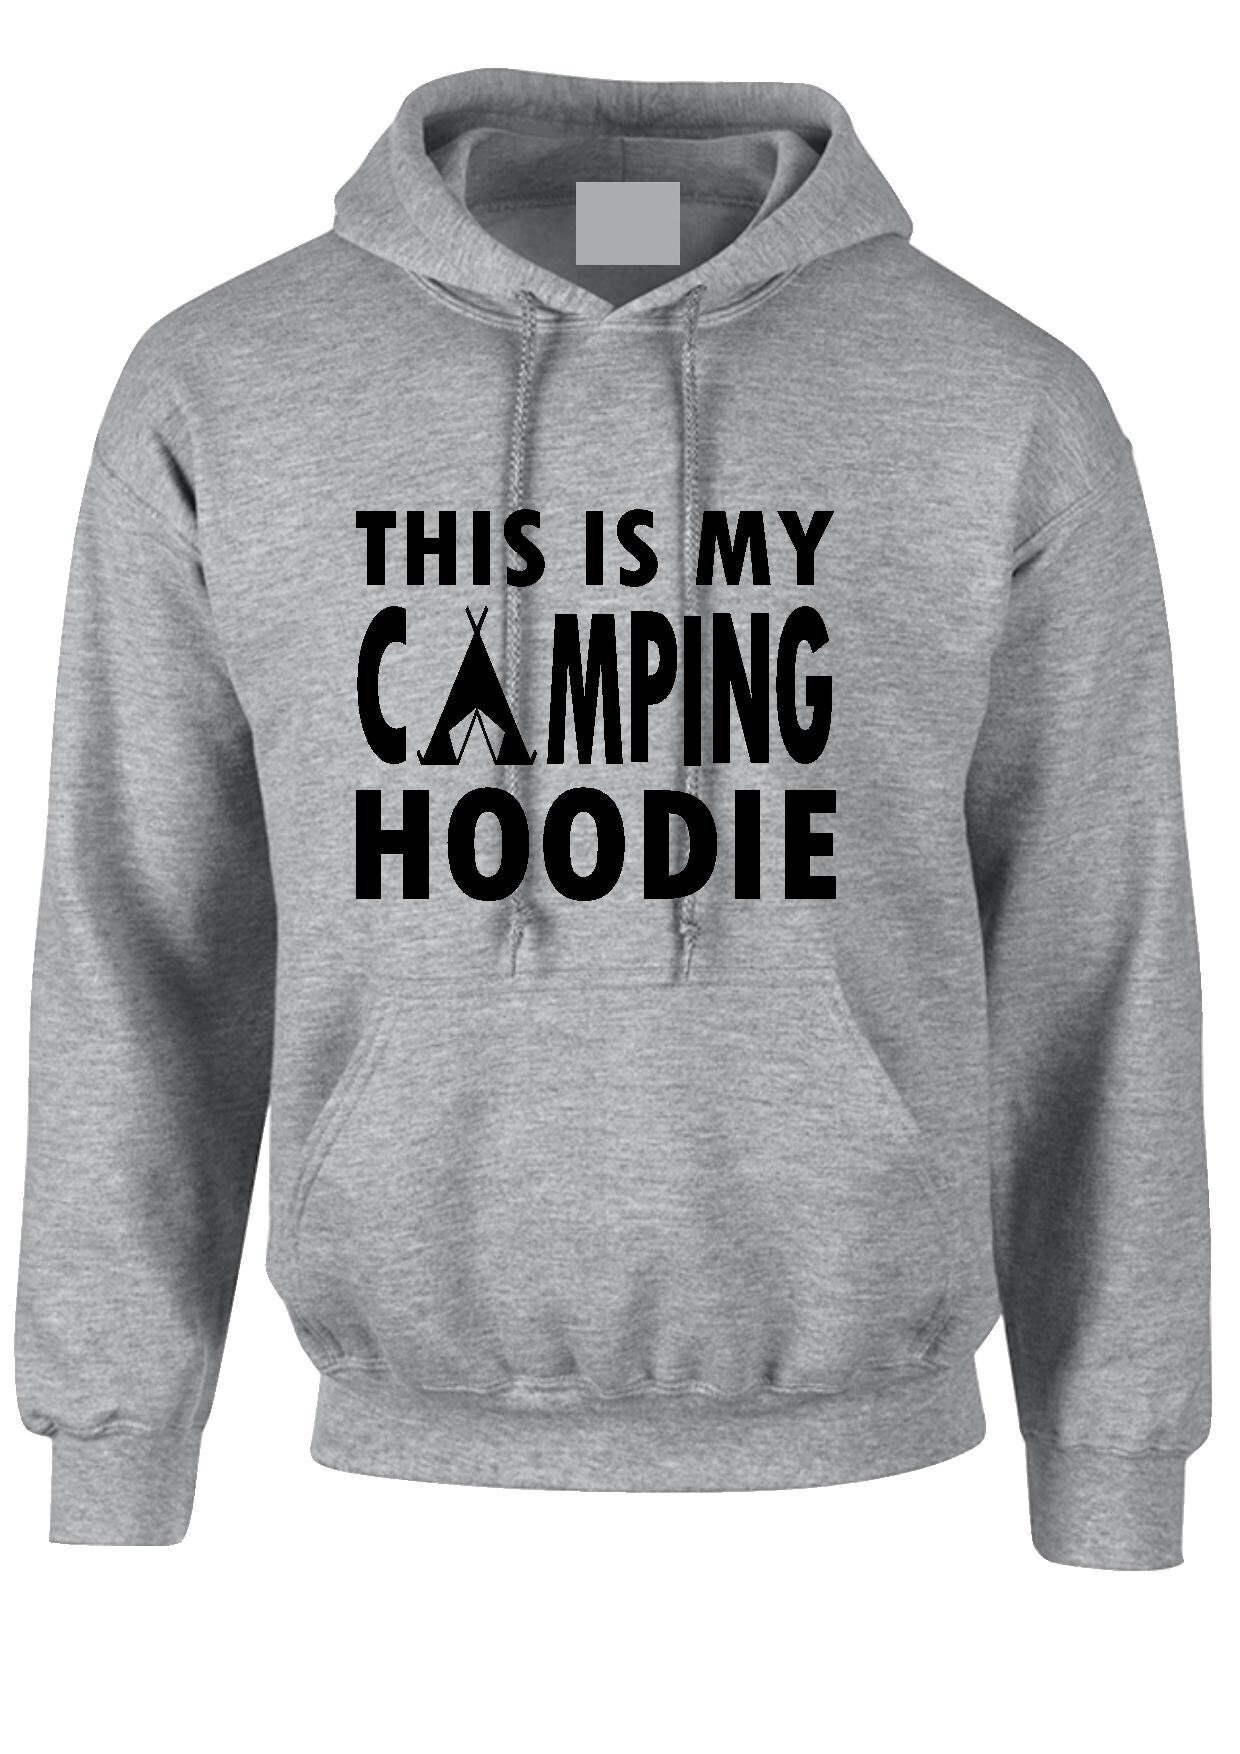 This Is My Camping Hoodie Unisex Hooded Top, Holiday Hoodie, Traveling Outfit